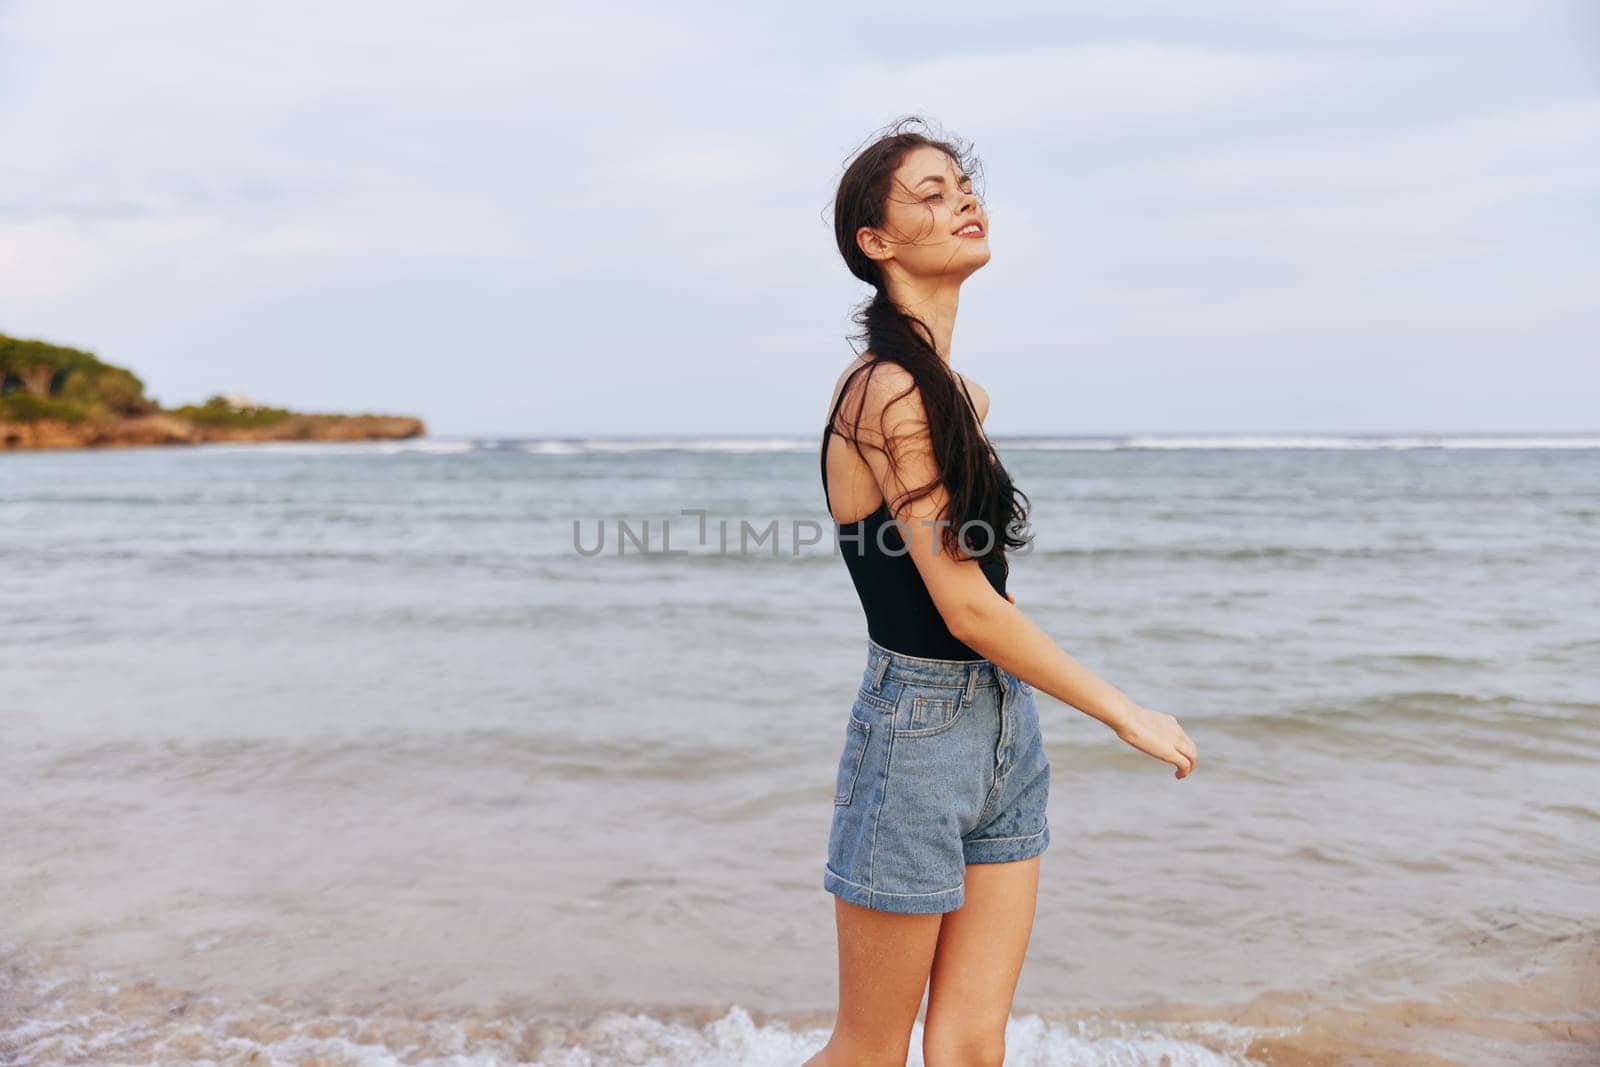 vacation woman space running jean sunset nature beach lifestyle holiday happiness sand smile female ocean sea copy freedom copy-space tropical carefree summer